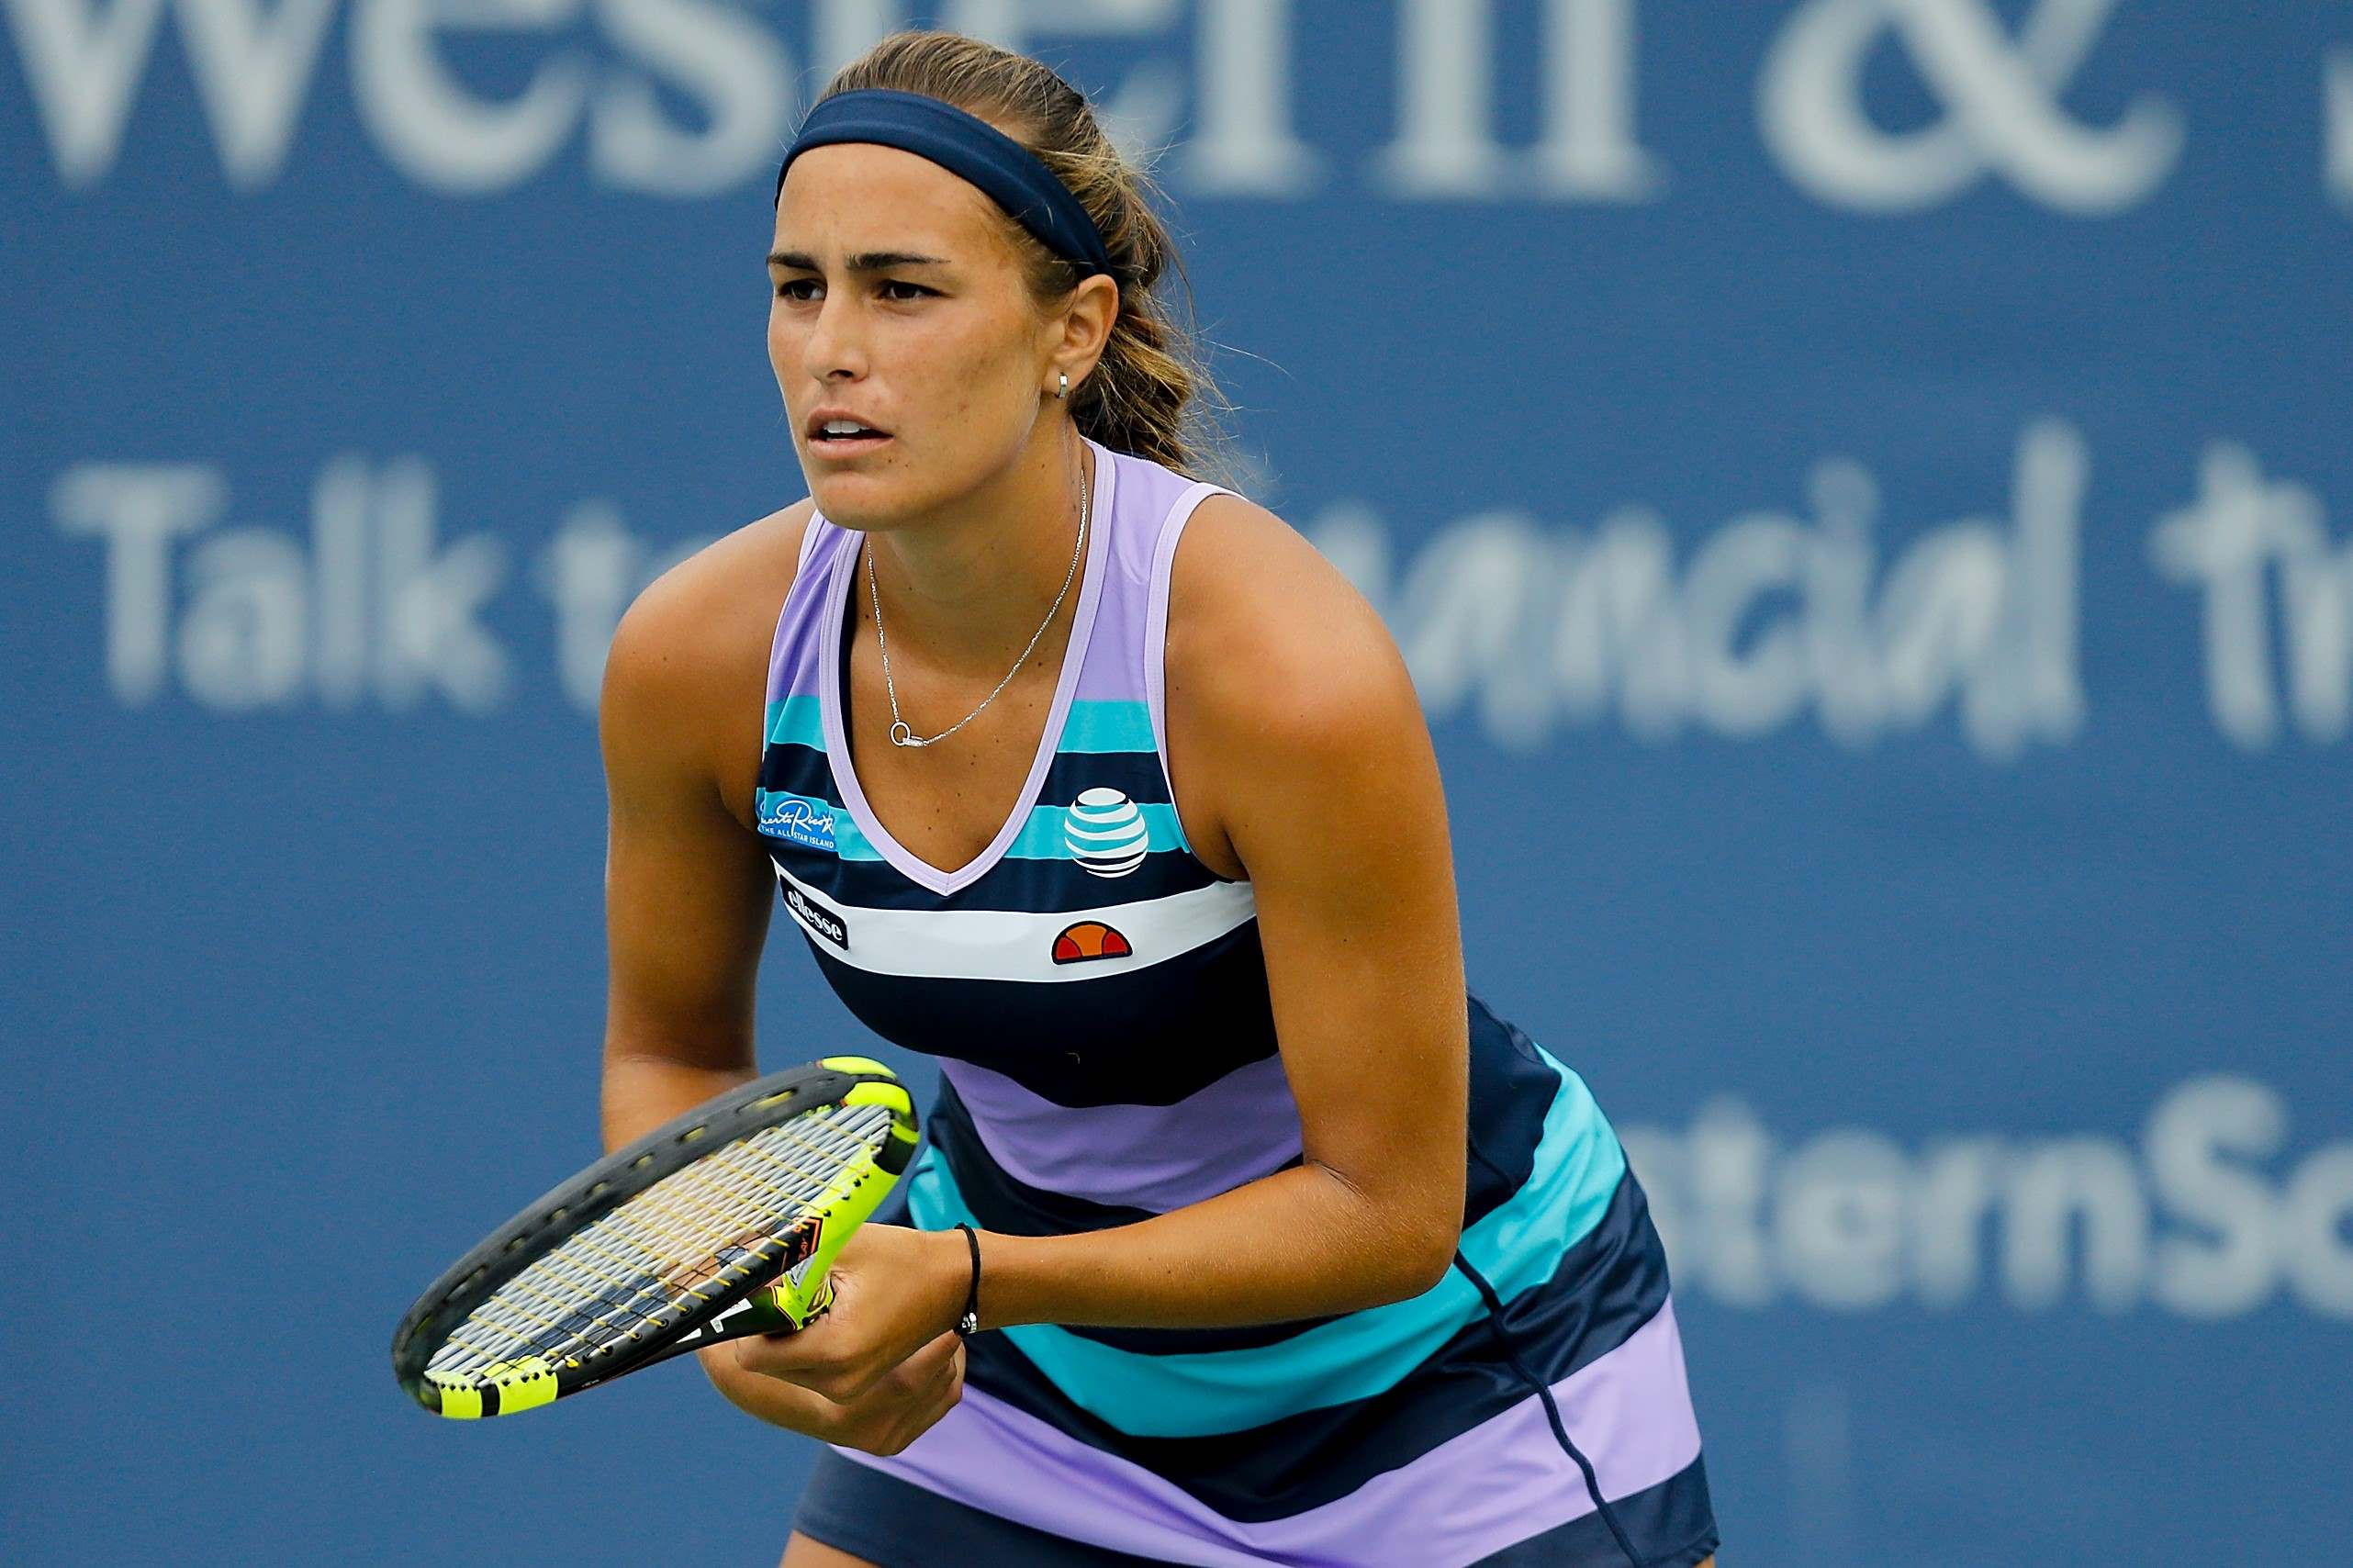 24-astonishing-facts-about-monica-puig